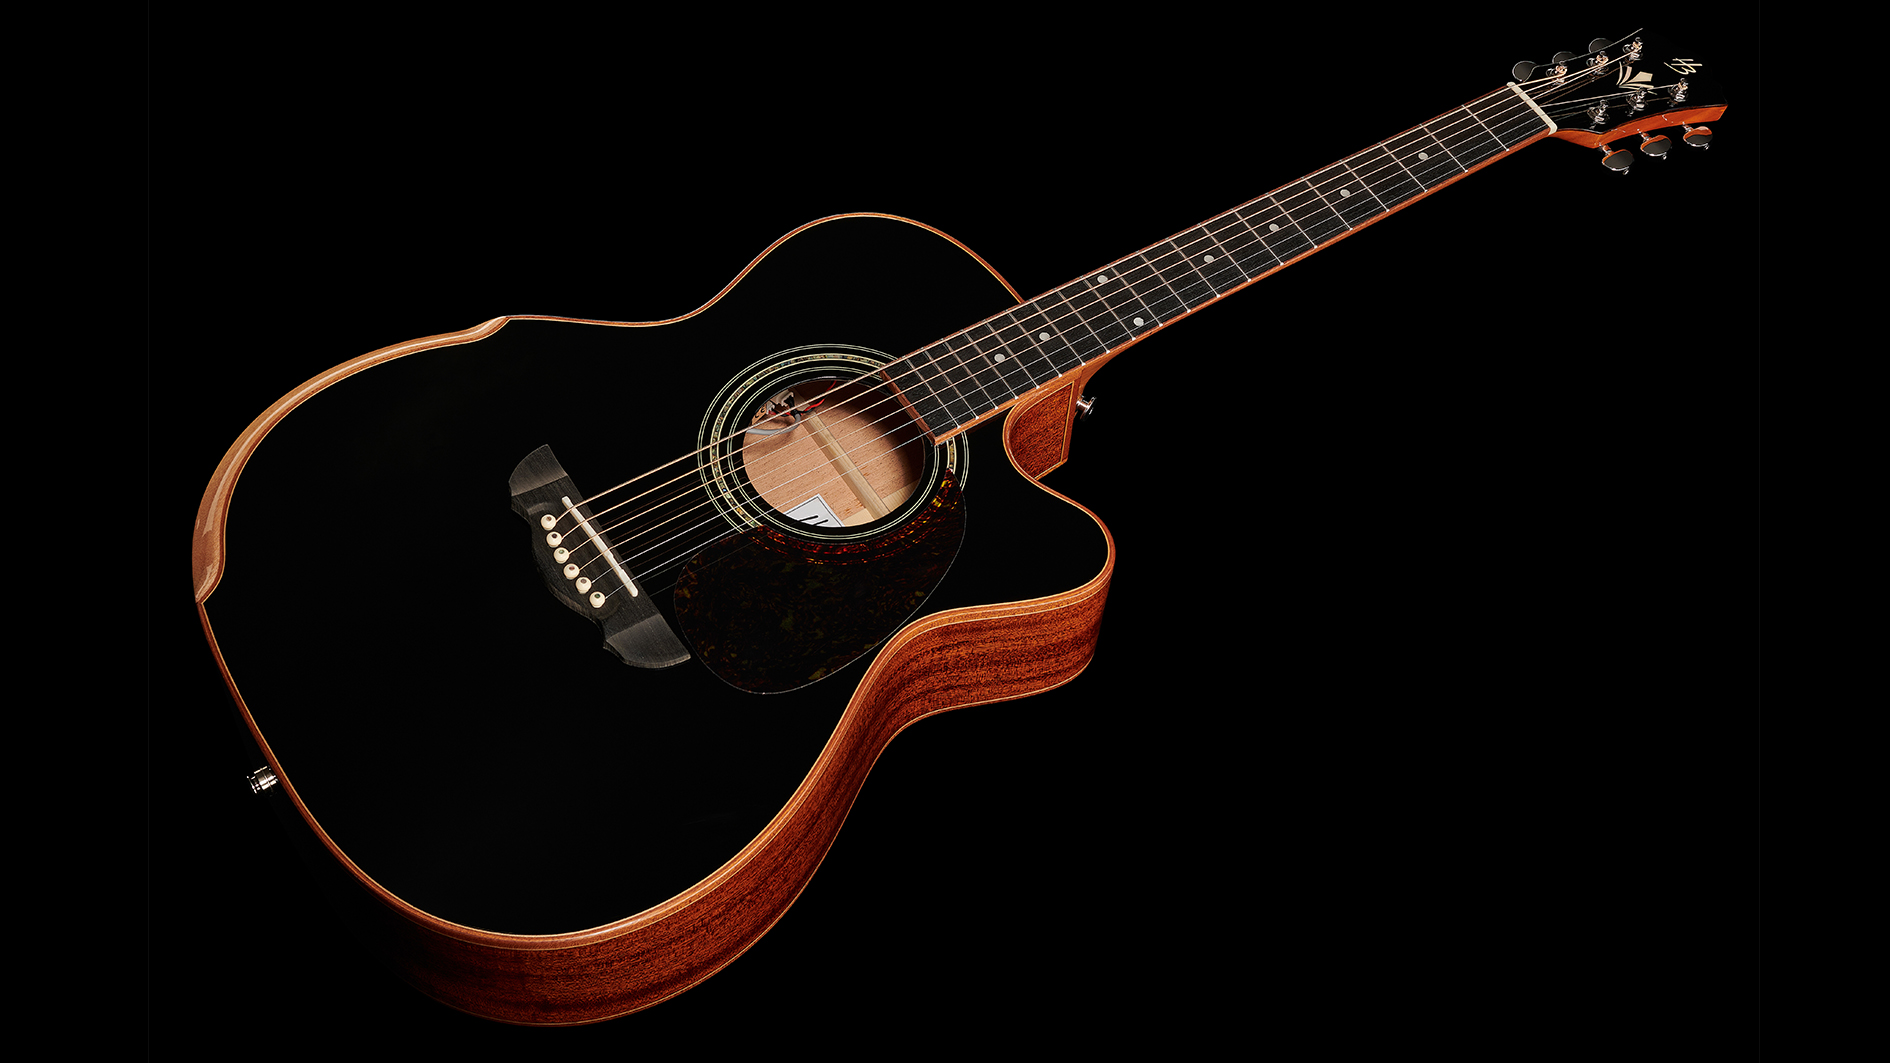 Harley Benton's CLC-650SM-CE Solid Wood features an all-solid African mahogany construction and Fishman electronics for under $500